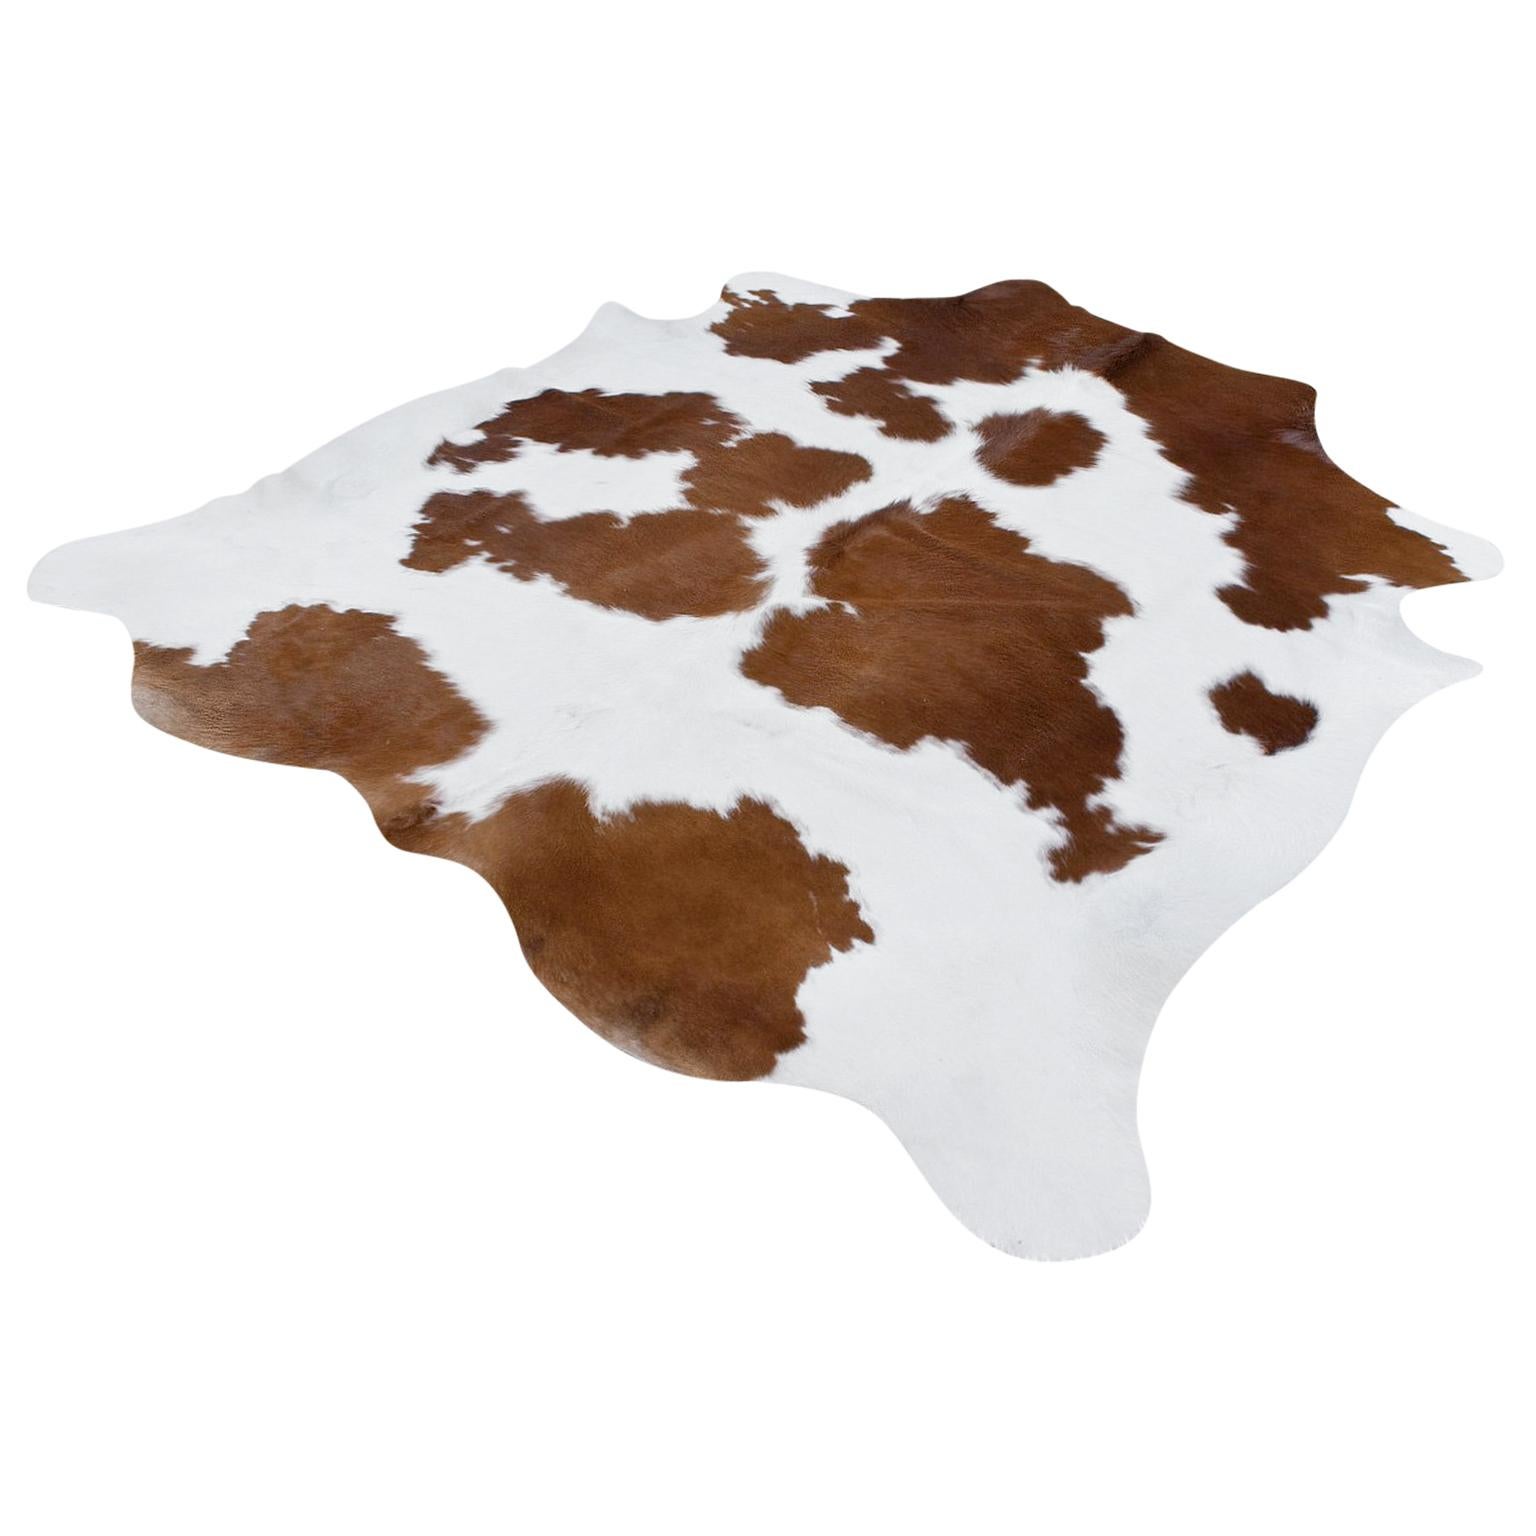 Organic Modern Natural White and Brown Cowhide or Rug, Dutch Cattle, 2018